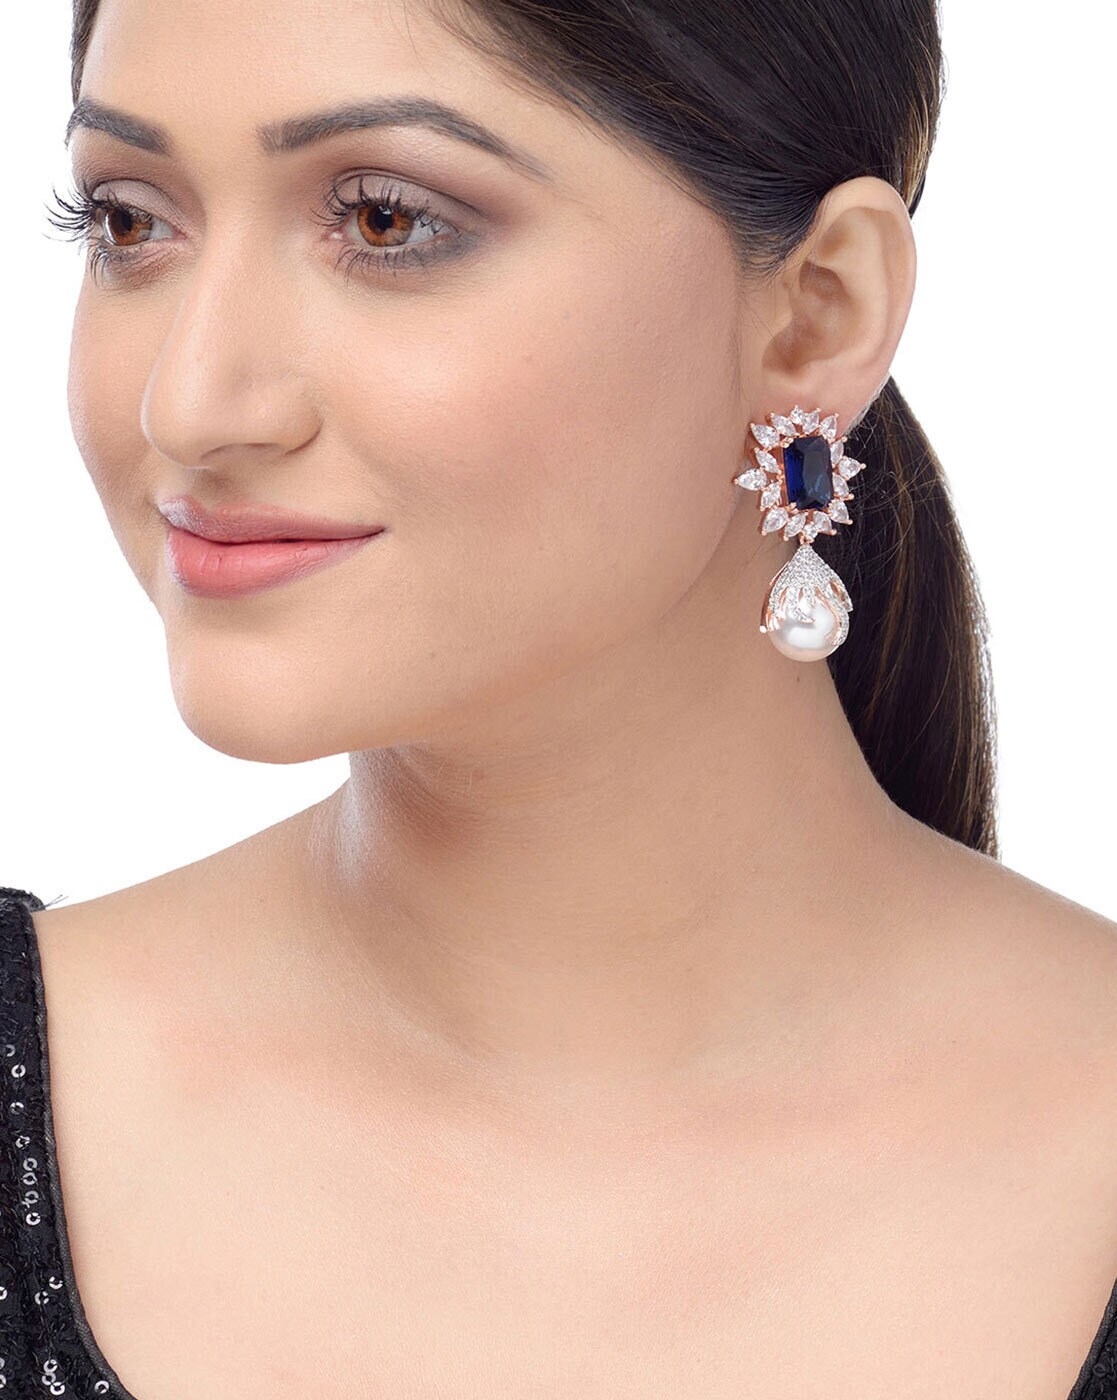 Blue and White Pearl Drop Earrings for Girls  Perfect for Saree or Suit   Clair Pearl Drop Earrings  Blingvine